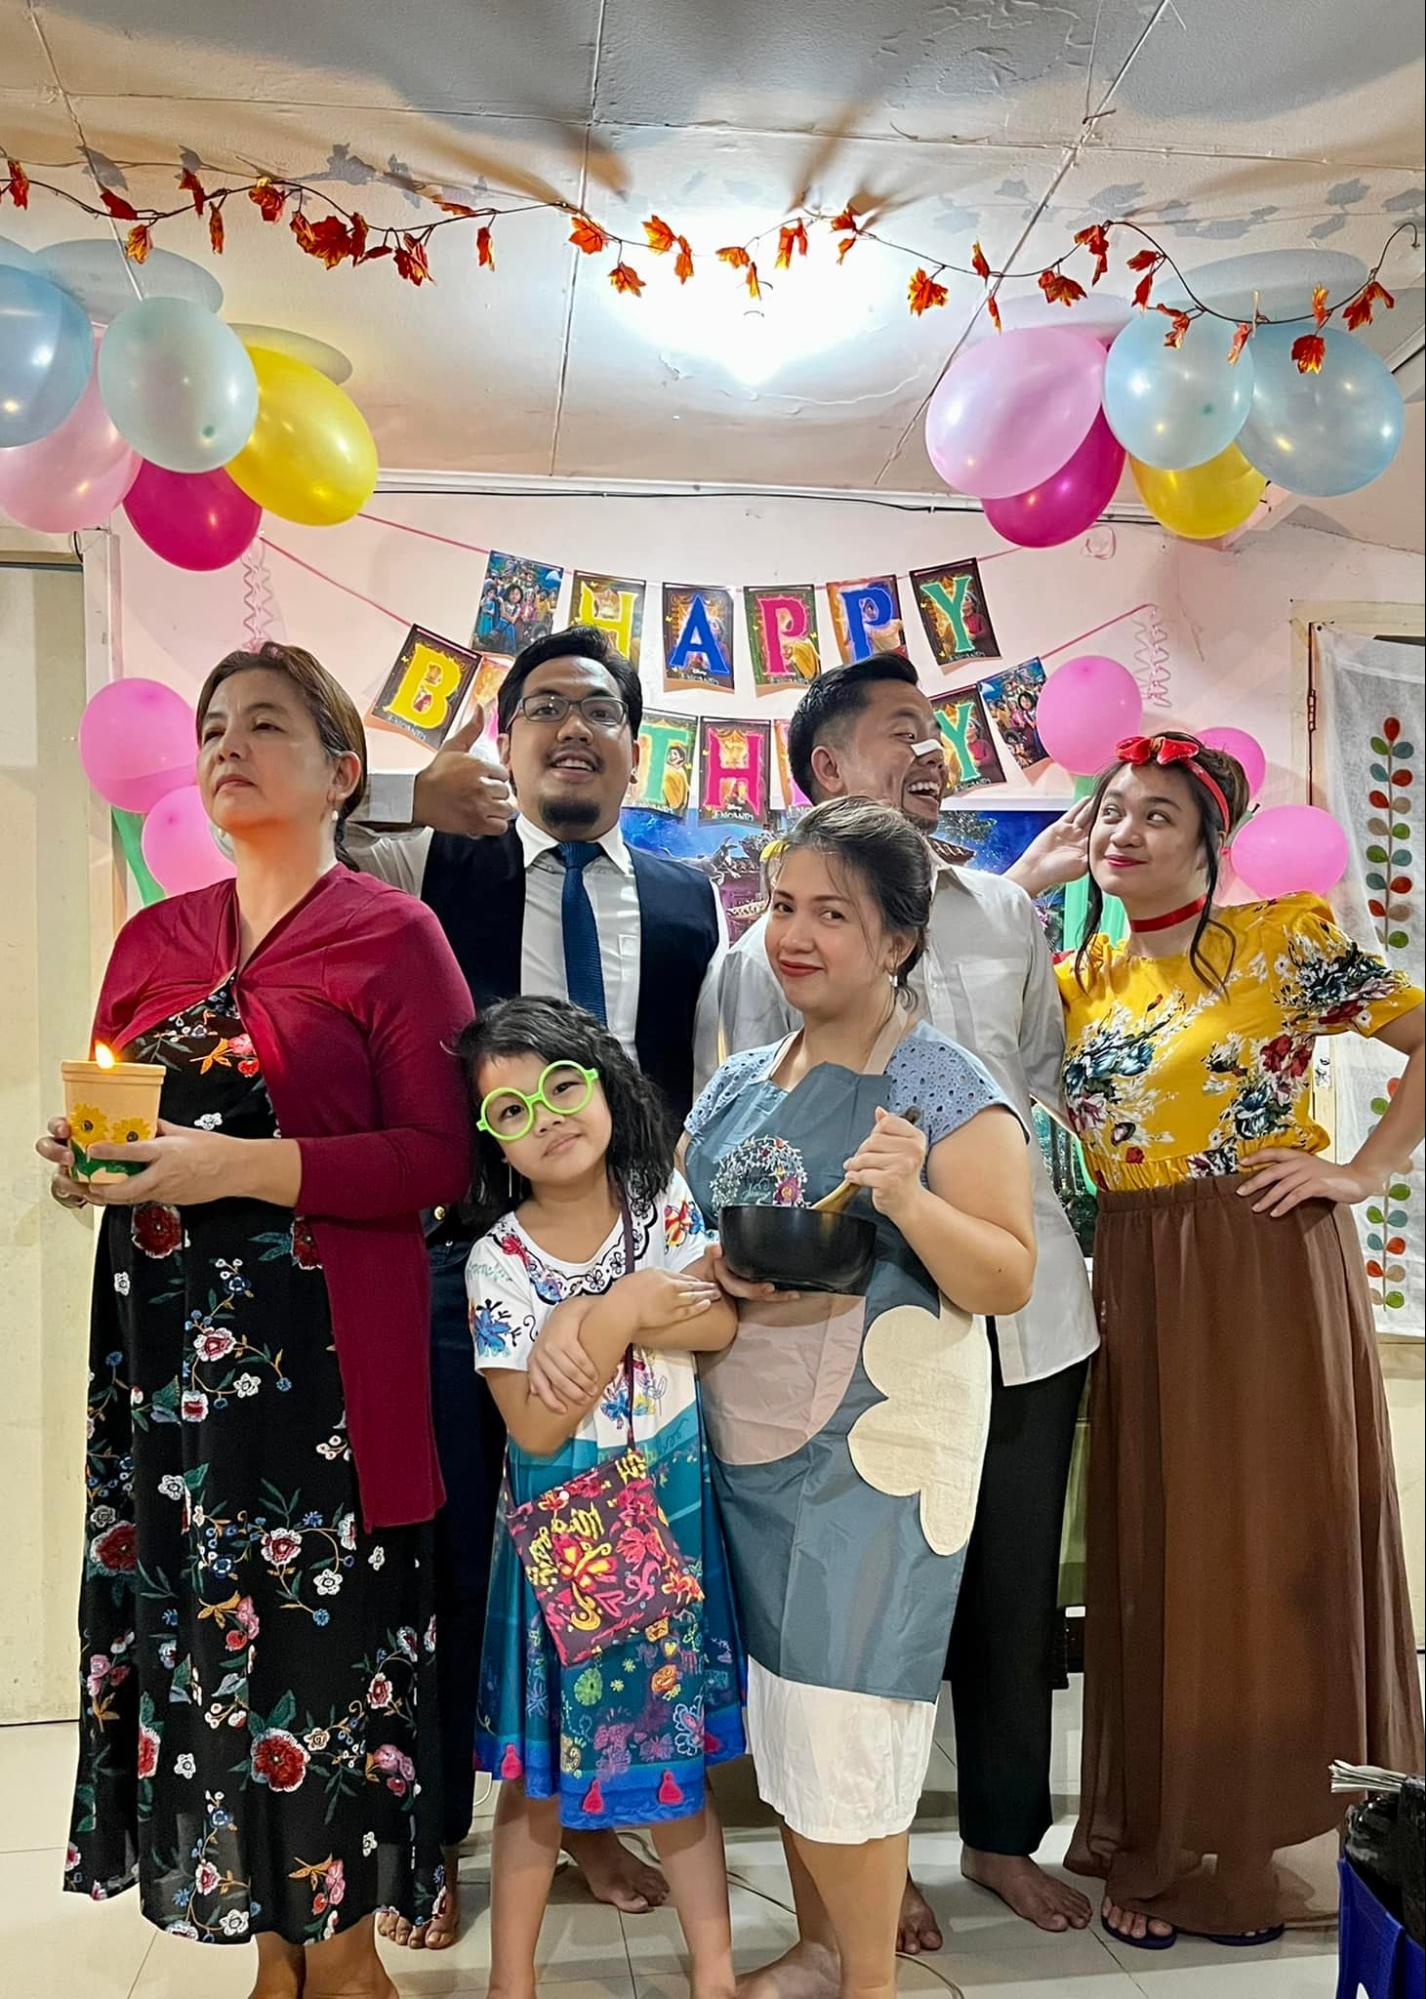 Mom throws daughter Encanto-themed birthday party - Madrigal family group photo